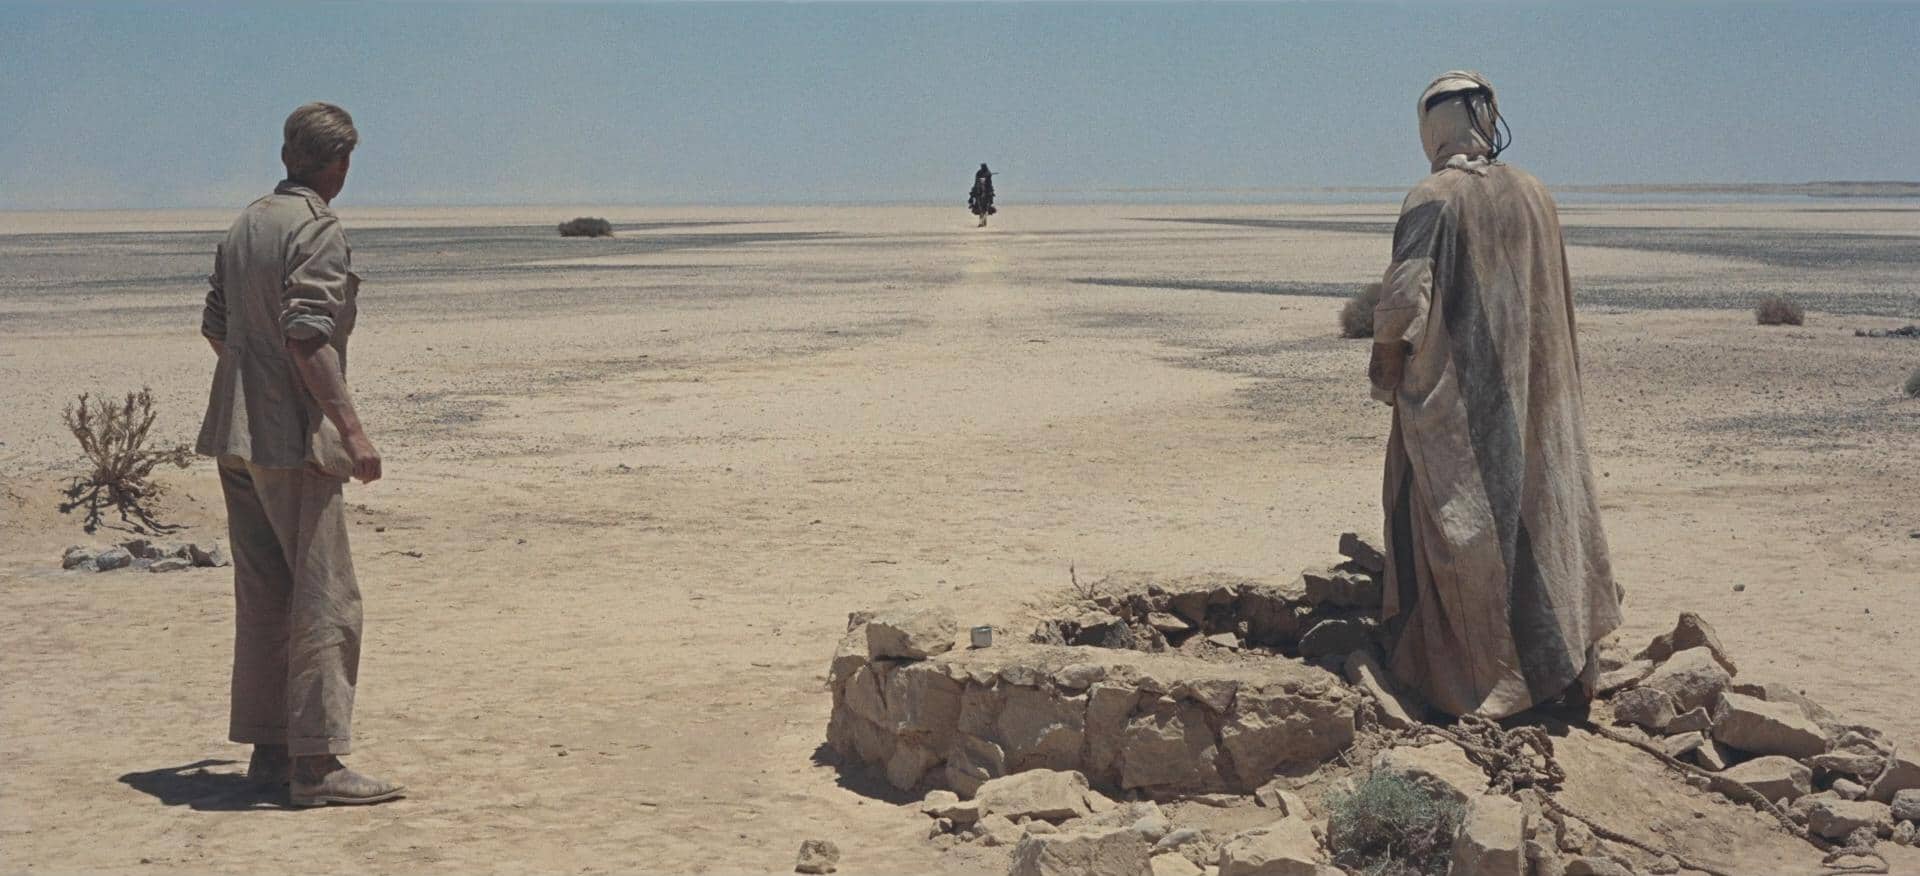 Wide Angle Shot - Camera Movements and Angles- Lawrence of Arabia